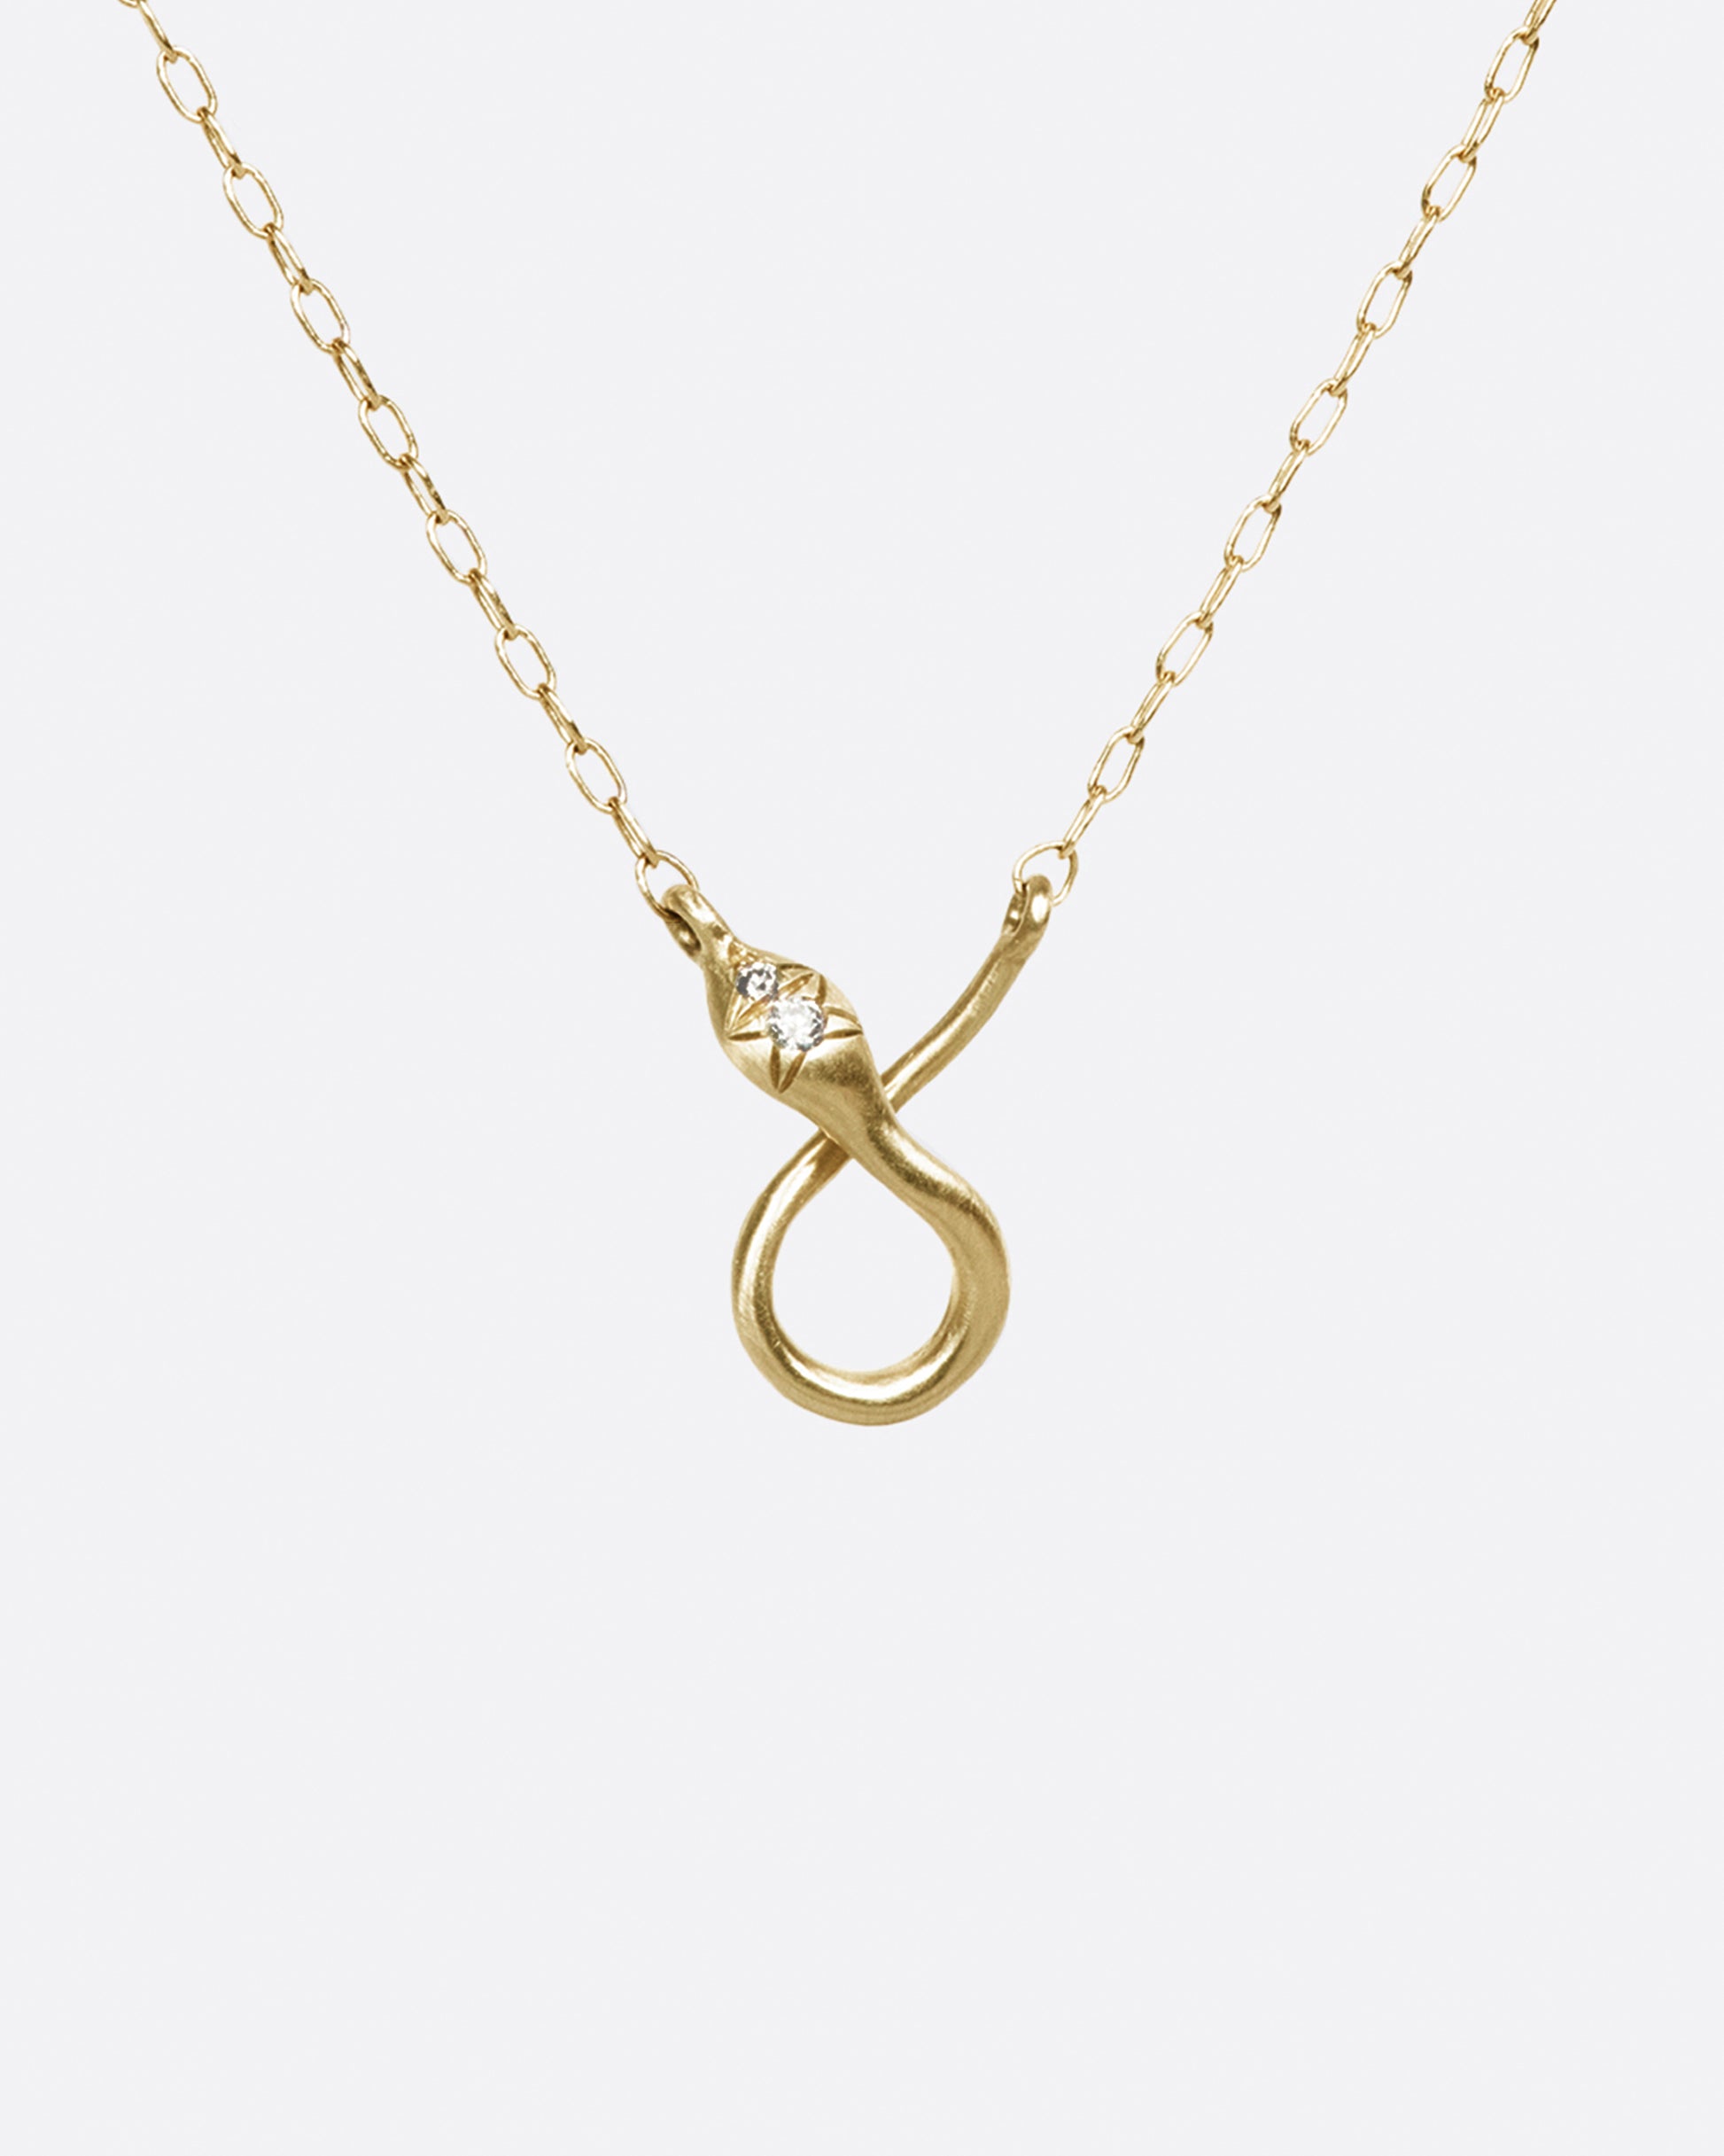 Wear this snake pendant necklace with your favorite charms; thread them on the chain and let them rest at the base of the curve.